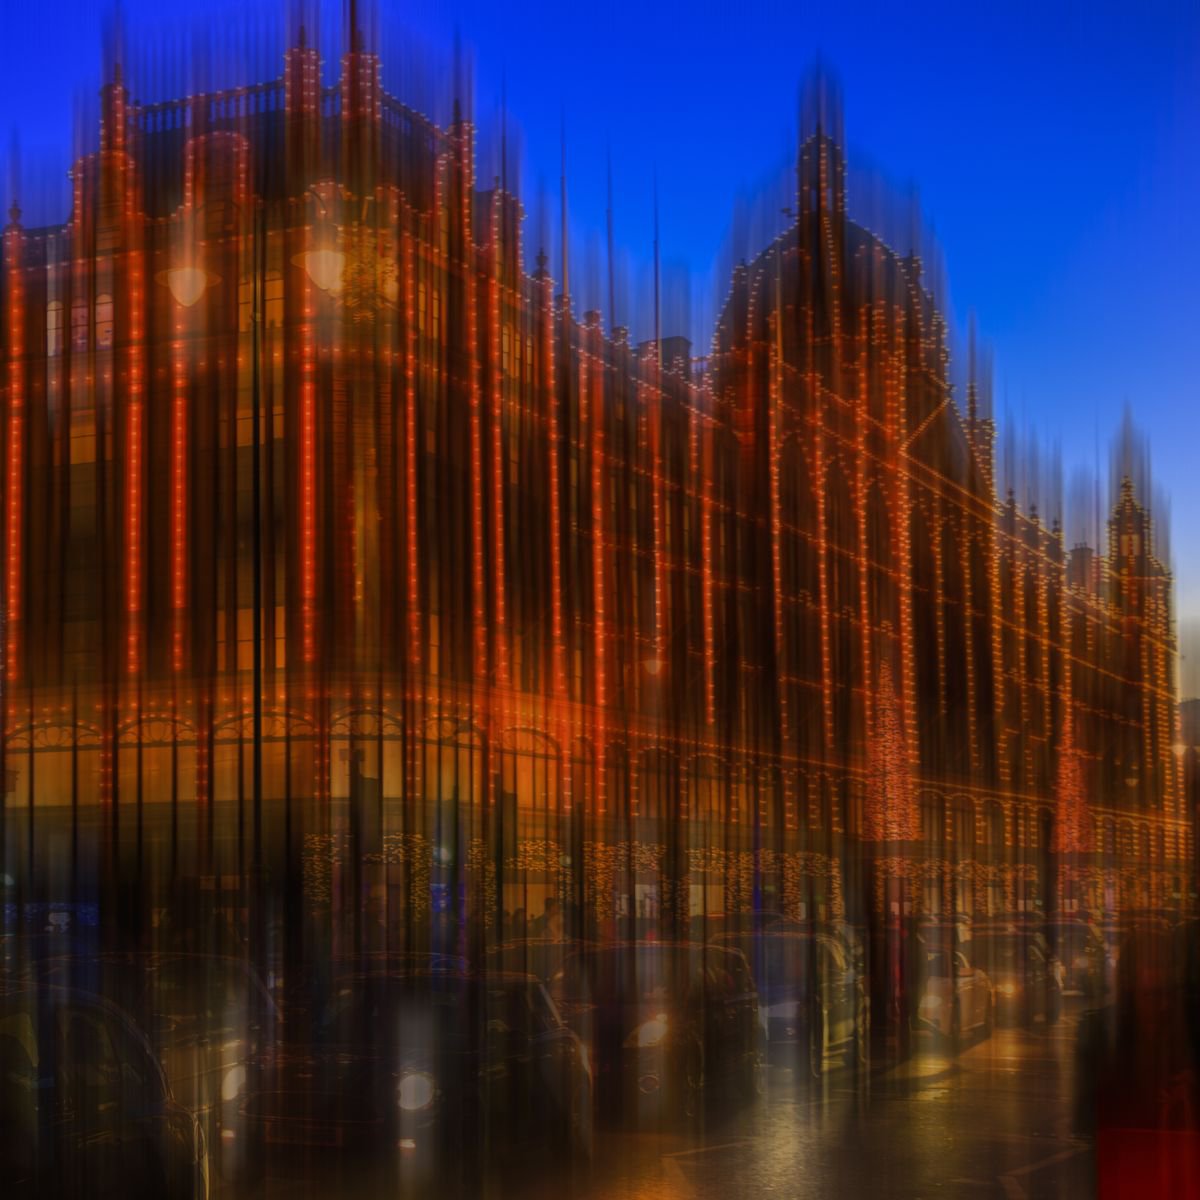 Abstract London: Harrods by Graham Briggs